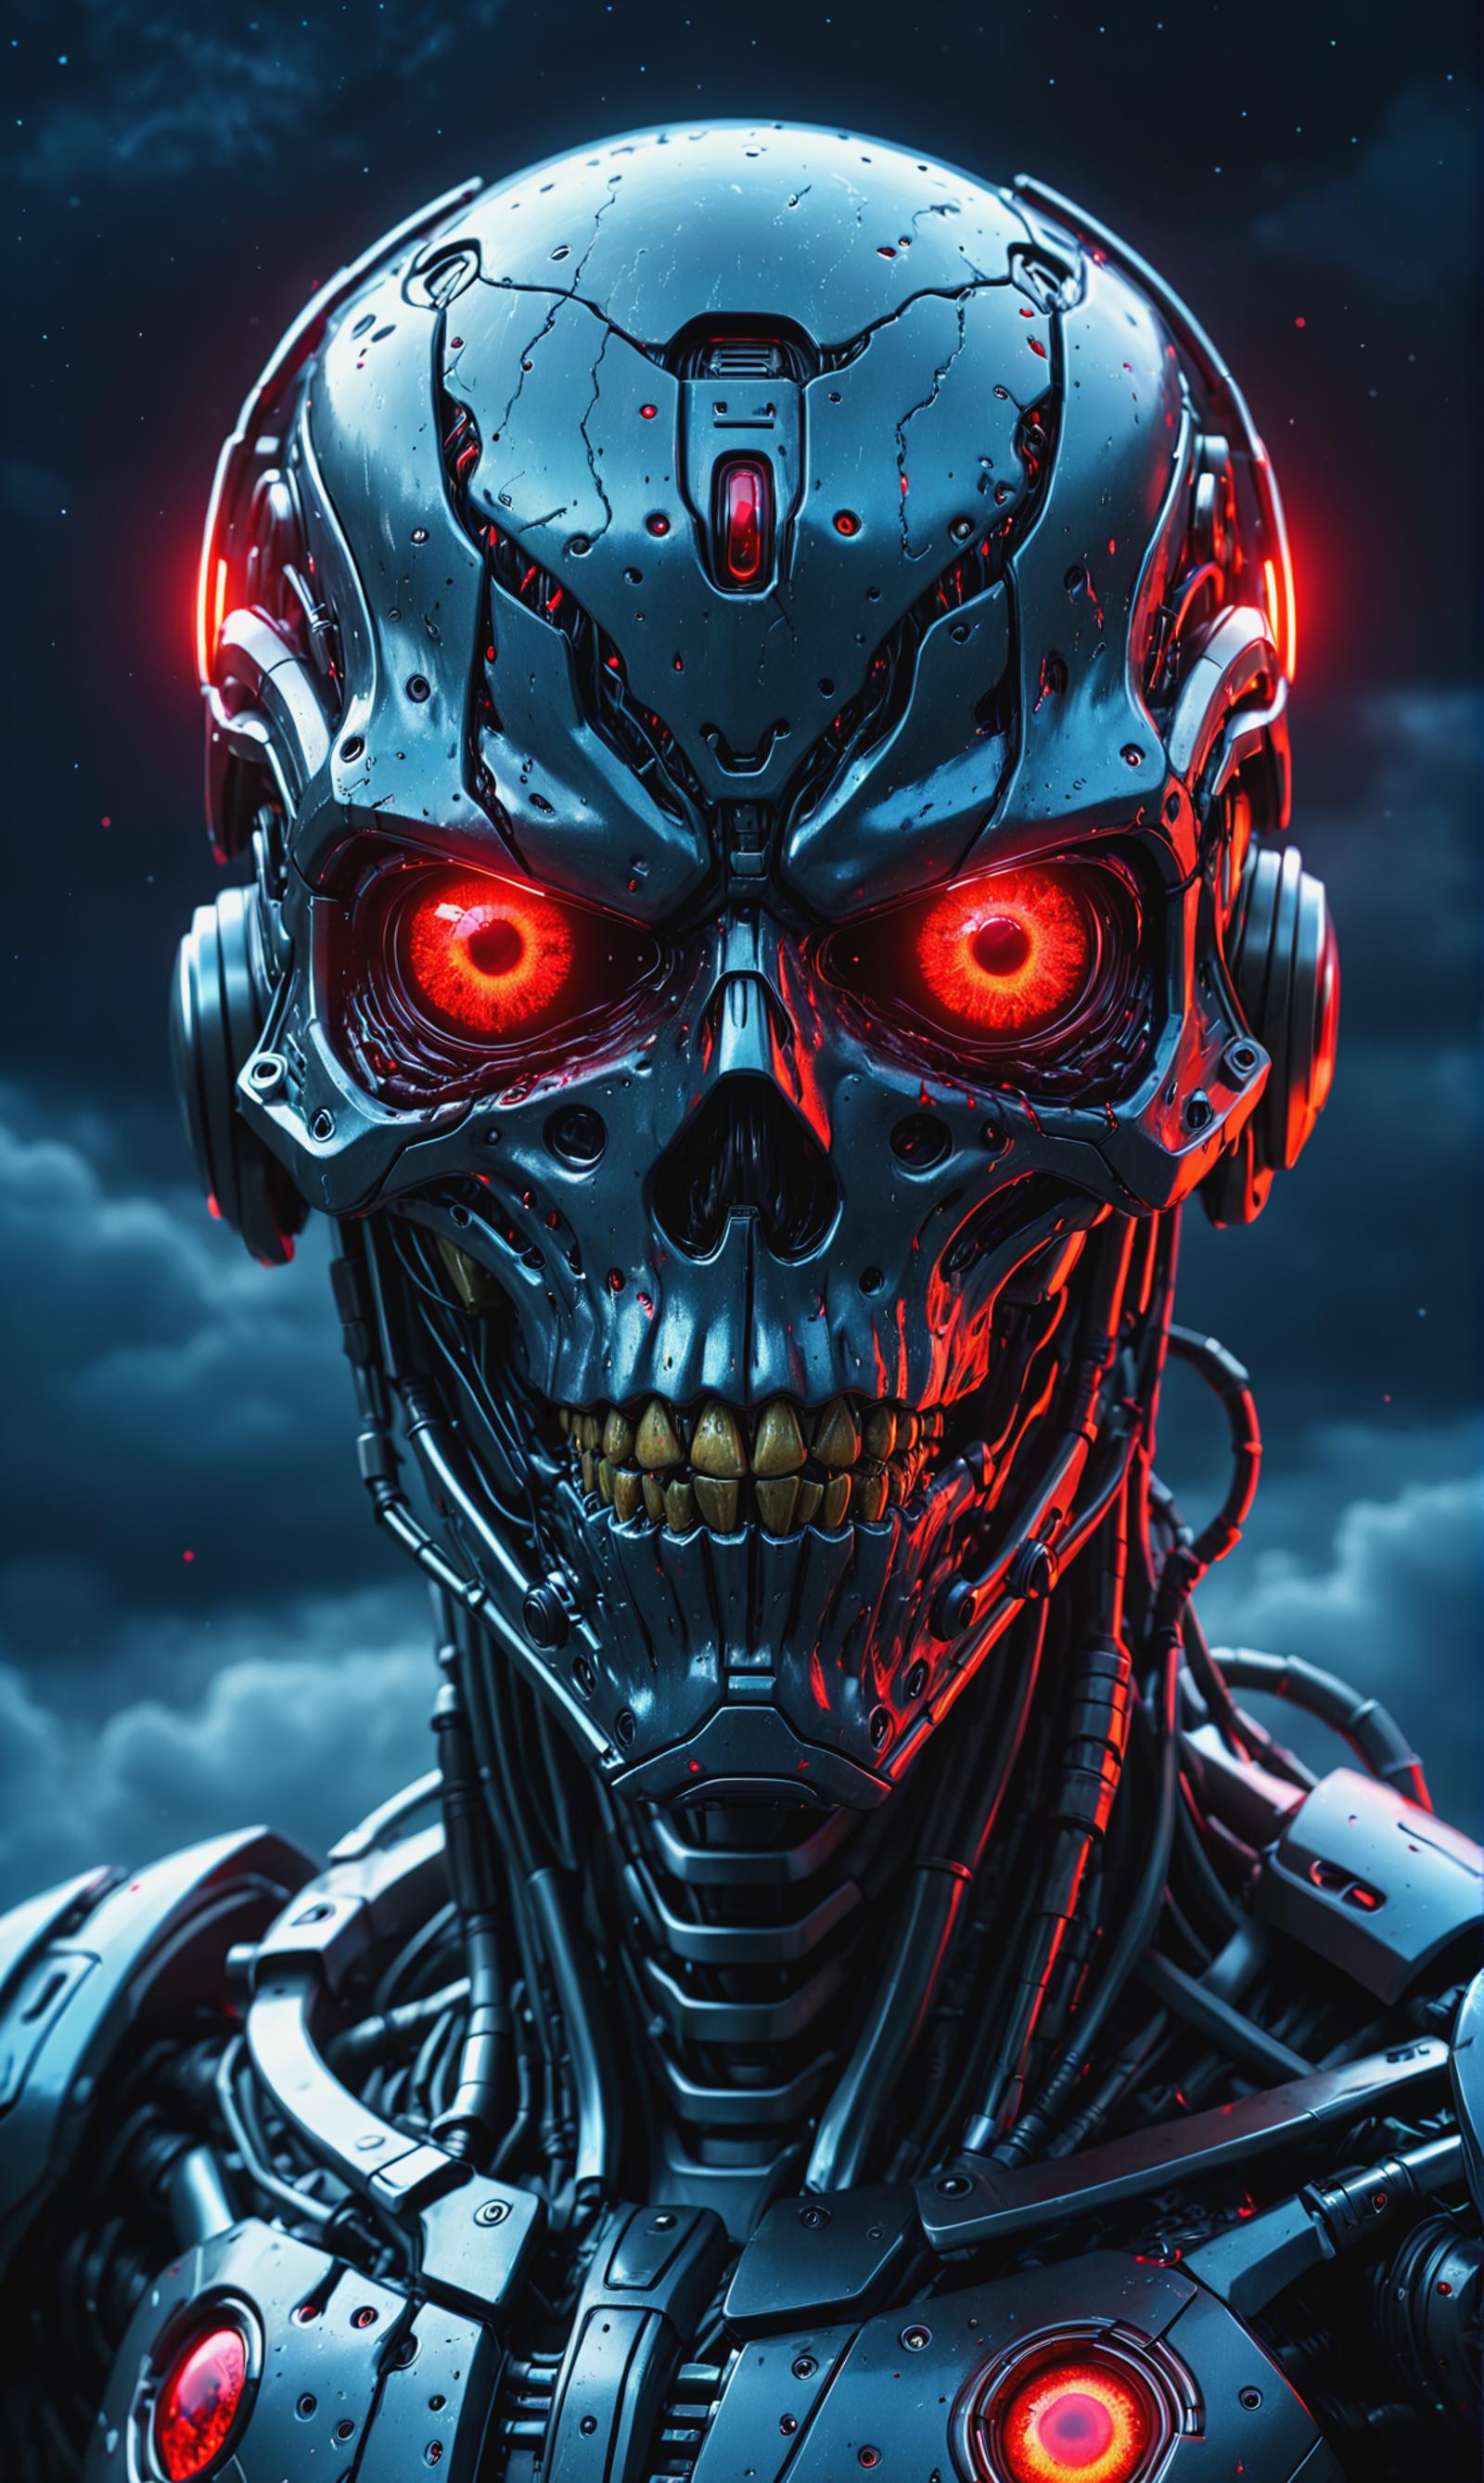 The Robot's Face: A Cybernetic Artwork with Glowing Red Eyes and Yellow Teeth against a Dark Background.